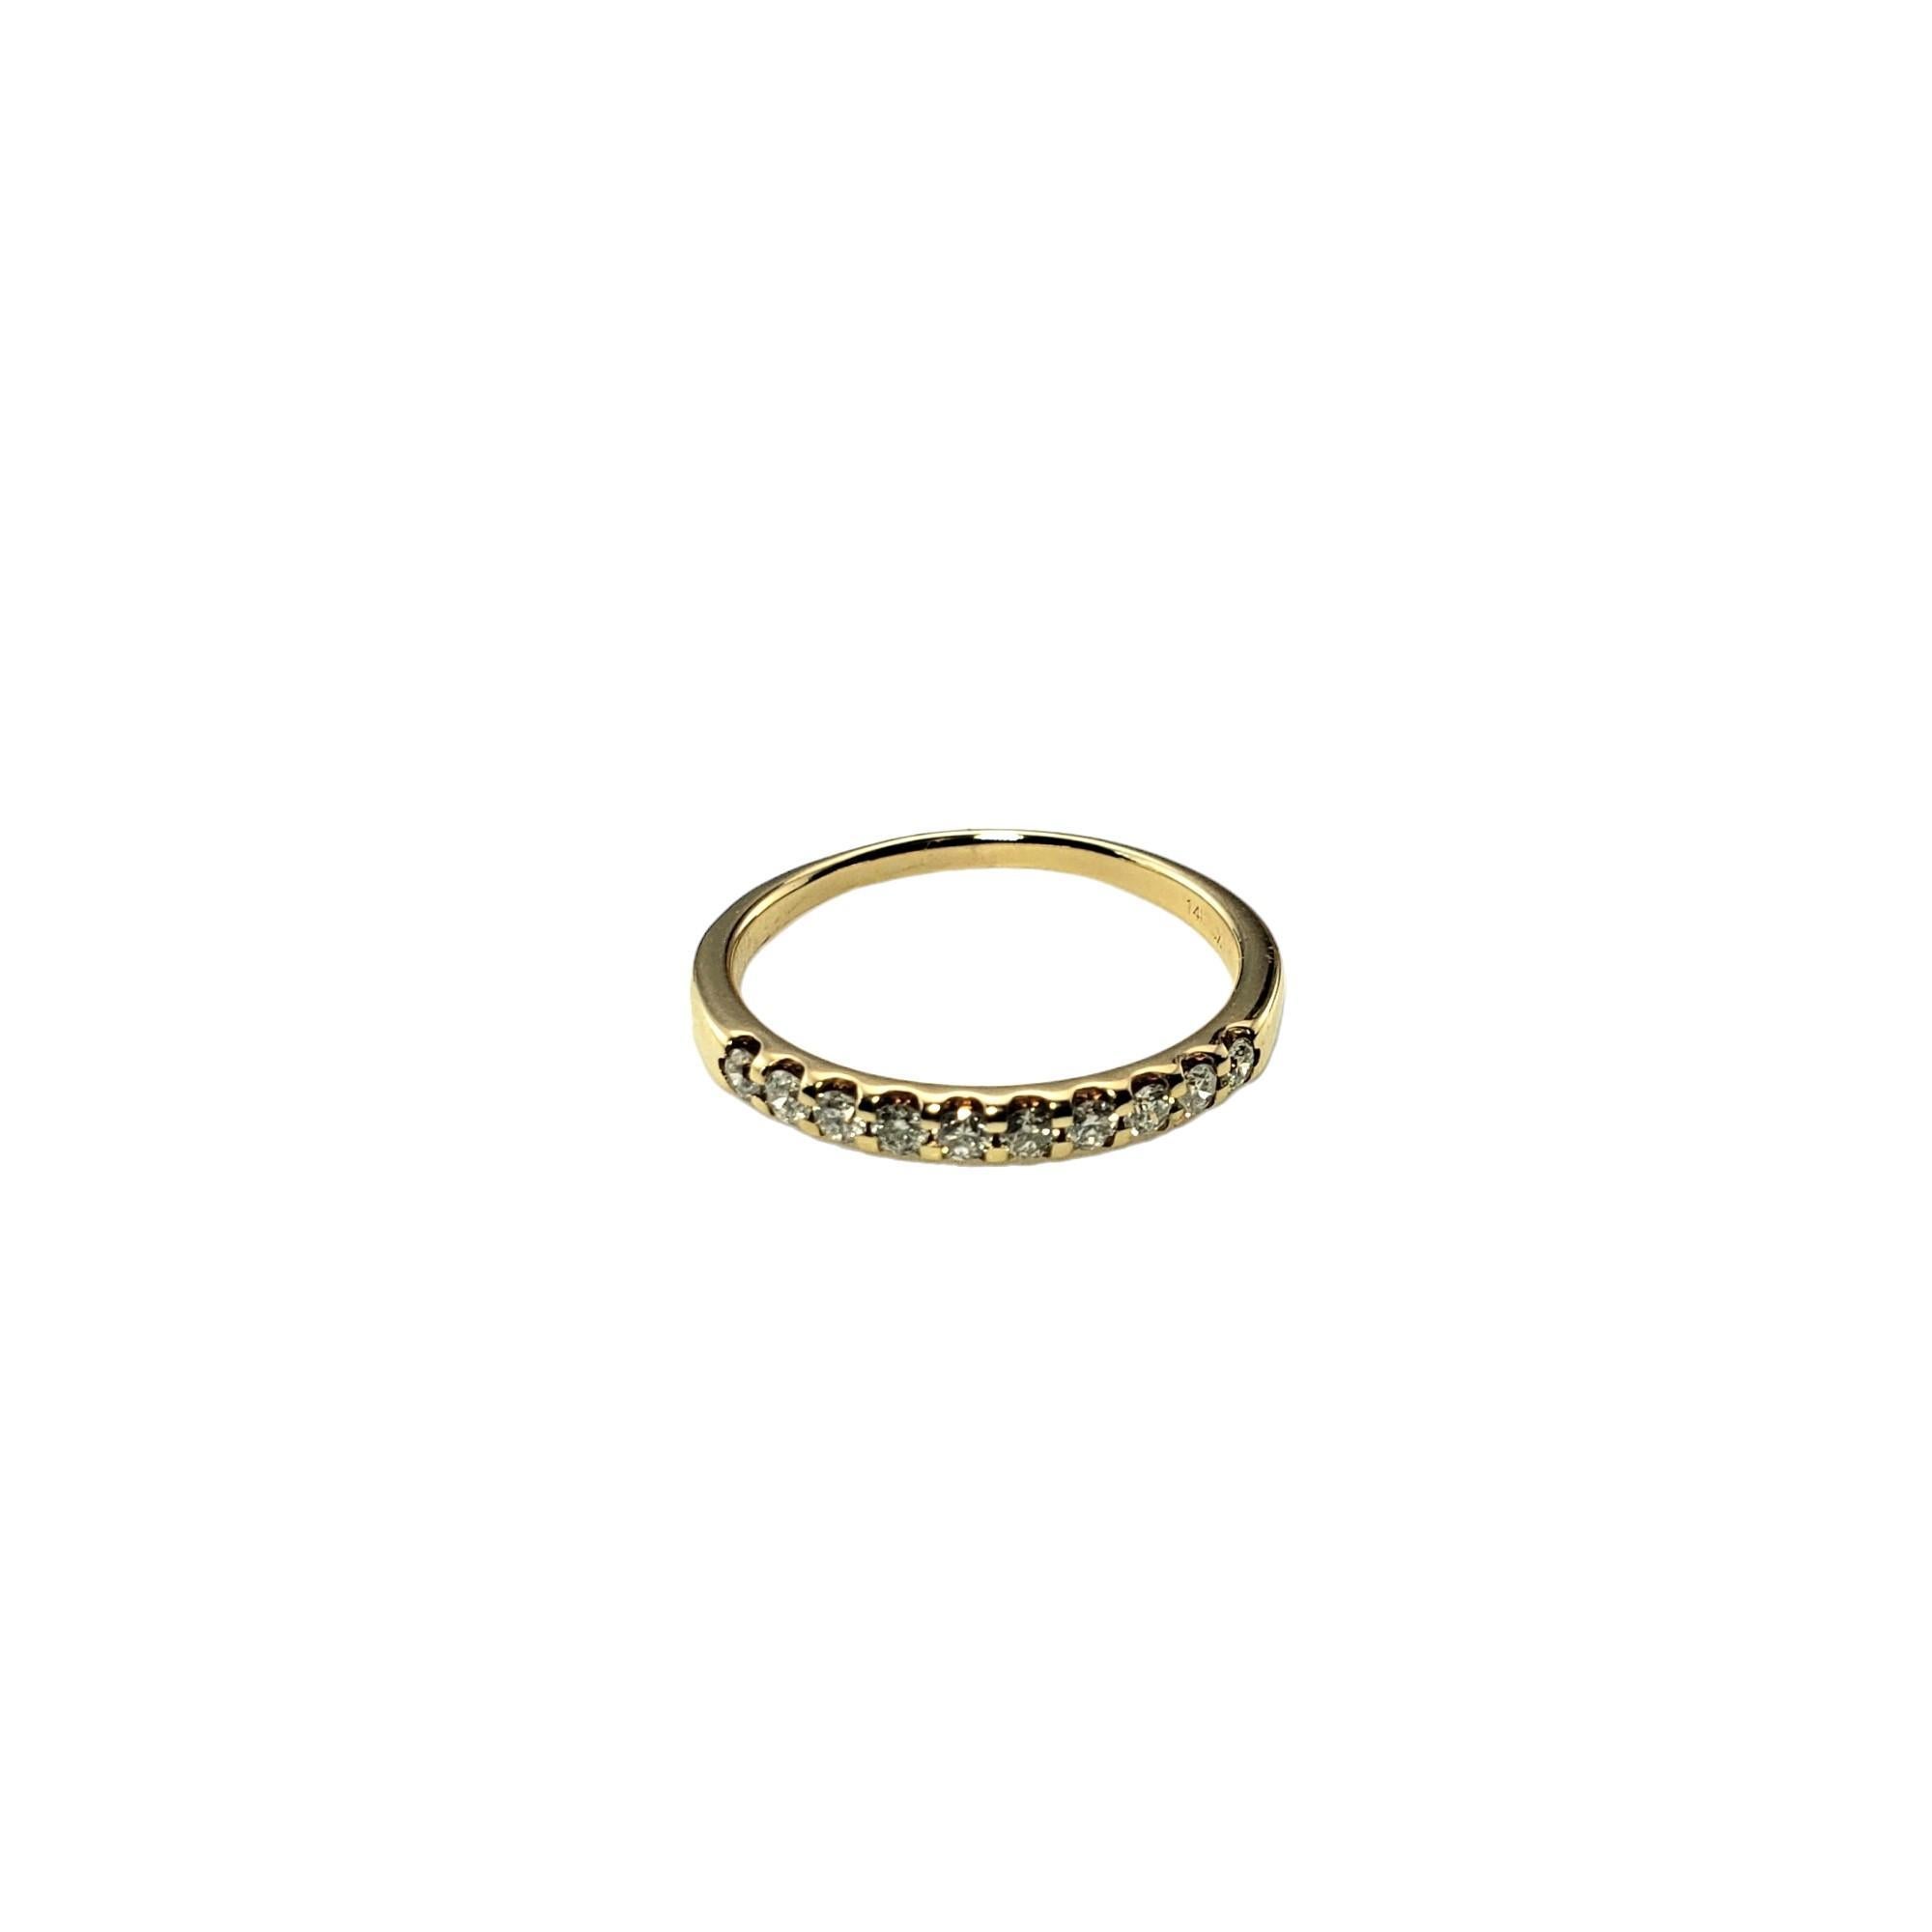 Vintage 14 Karat Yellow Gold Diamond Band Ring Size 6.5-

This sparkling band features ten round brilliant cut diamonds set in classic 14K yellow gold.  Width:  2 mm.  Shank: 1.6 mm.

Total diamond weight: .30 ct.

Diamond clarity: SI1-I1

Diamond